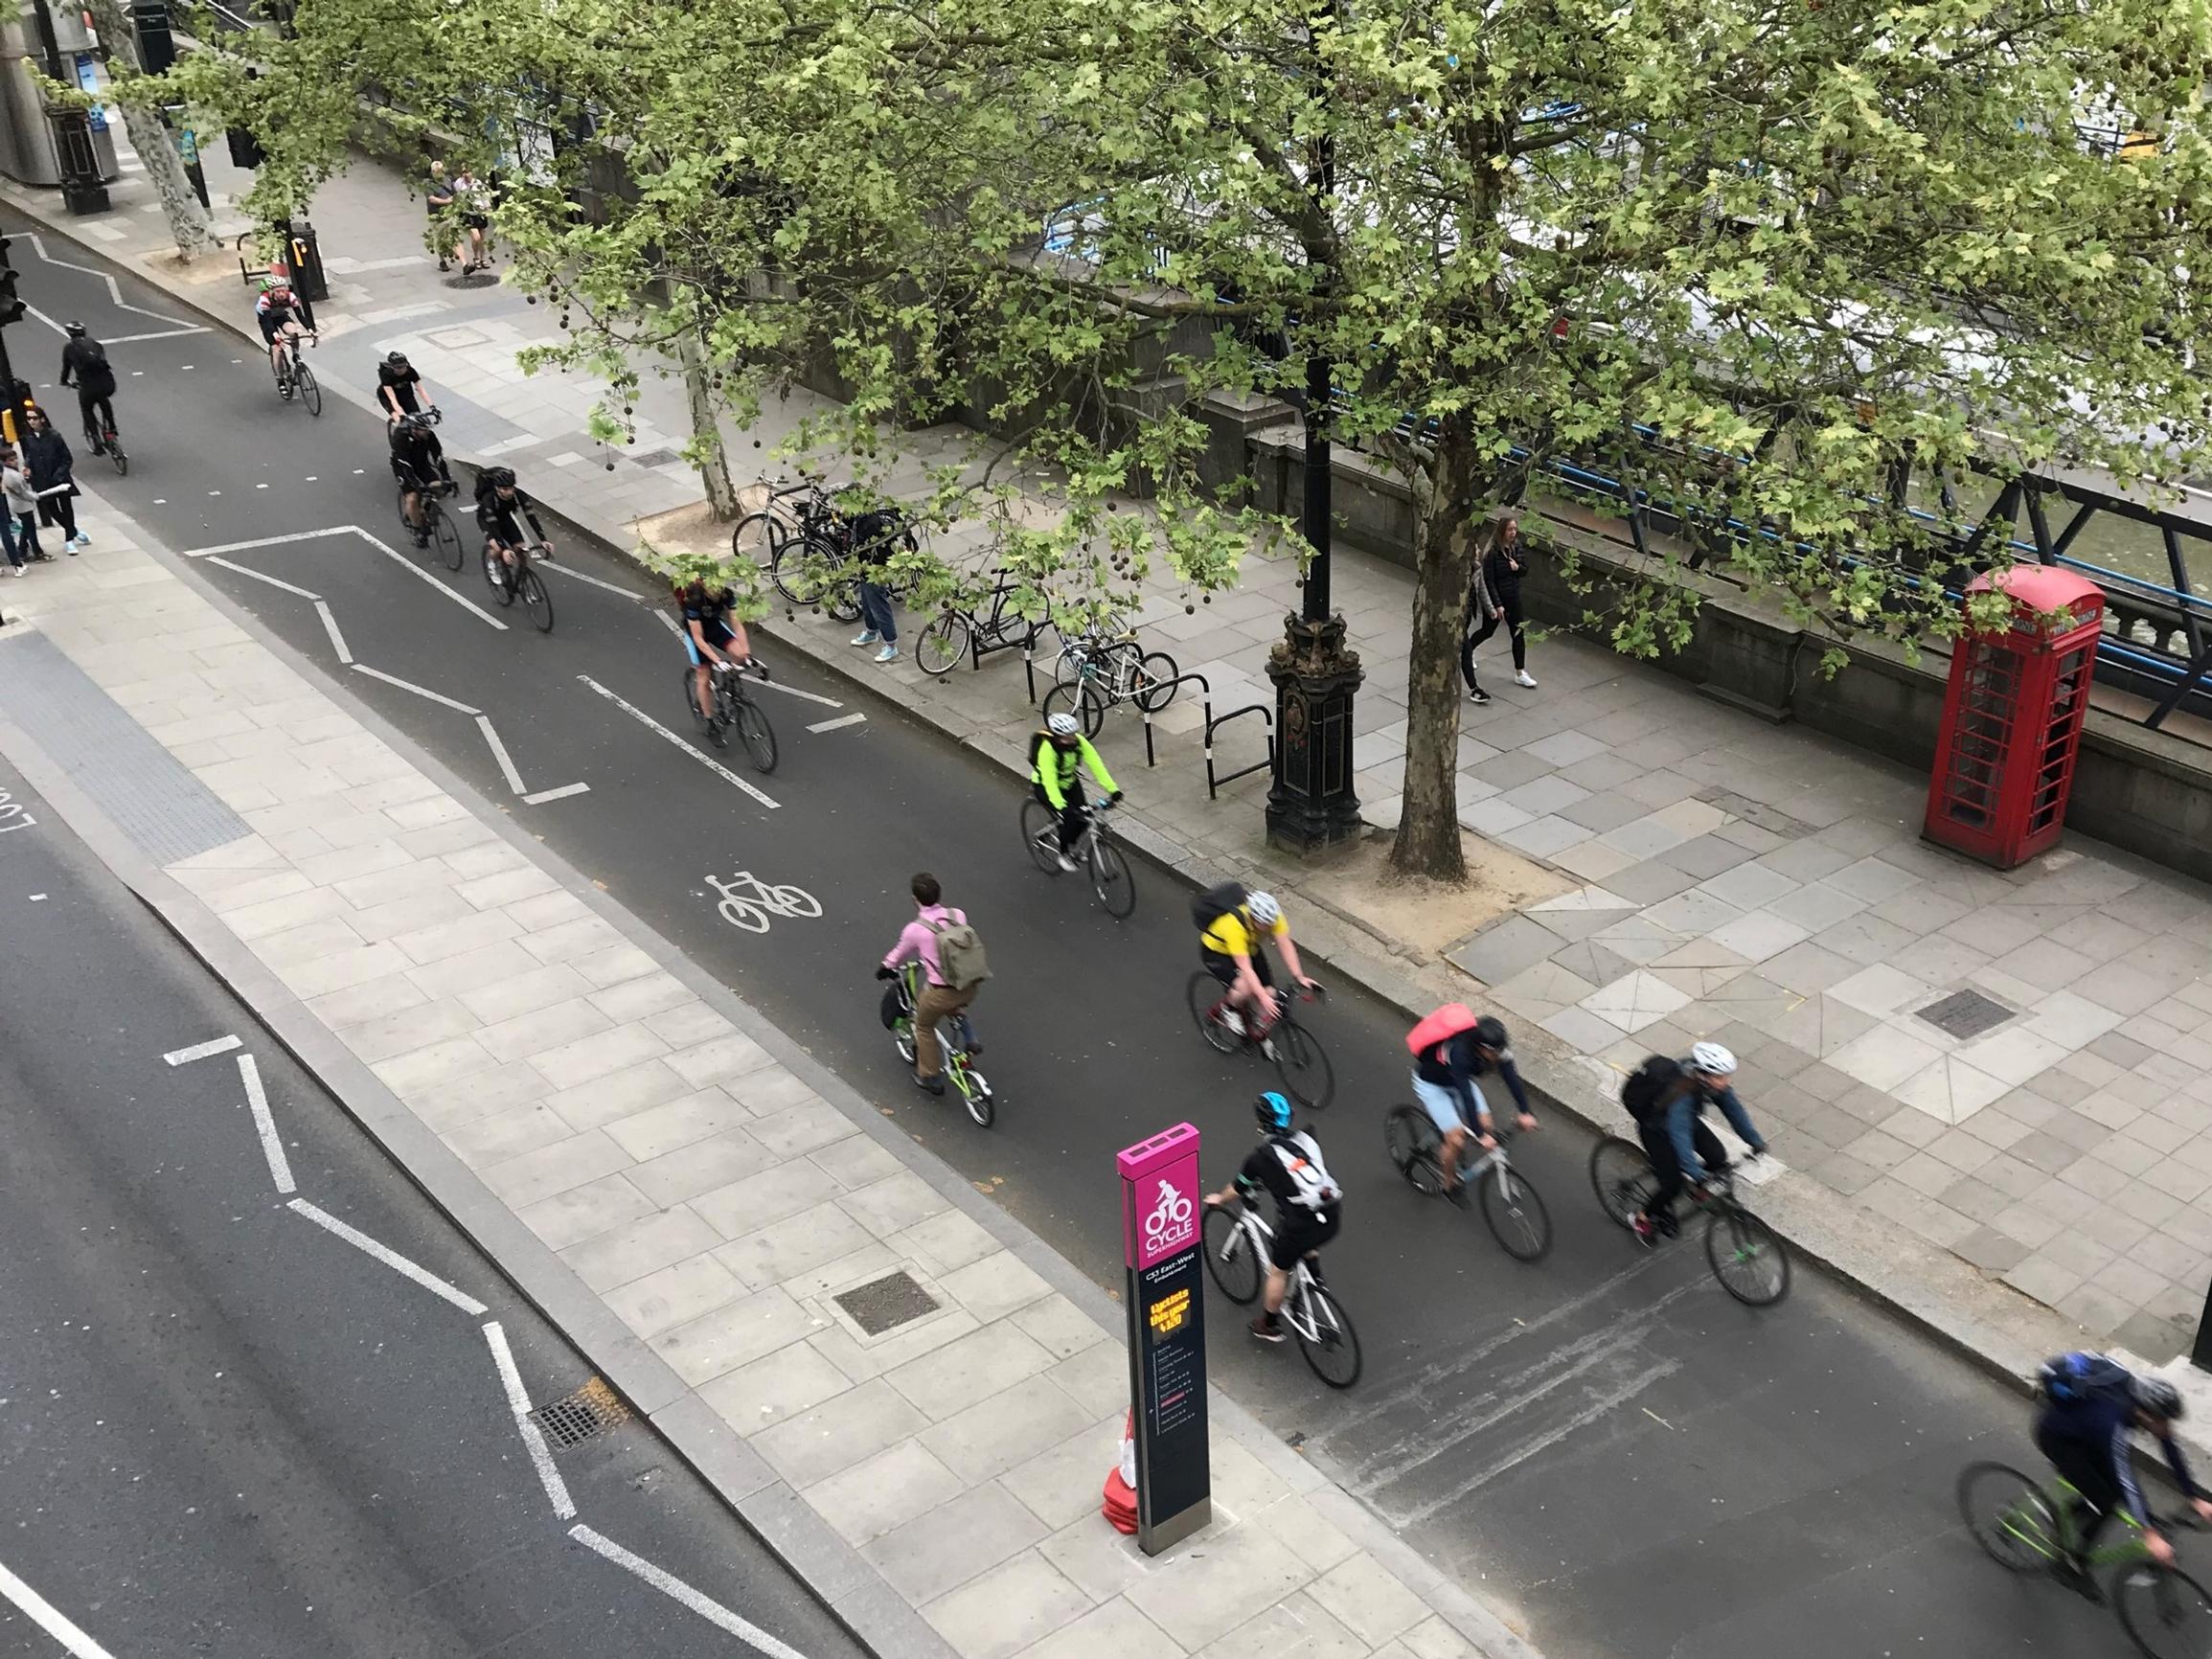 London built this cycle track and loads of people on bikes came. But sometimes it’s empty